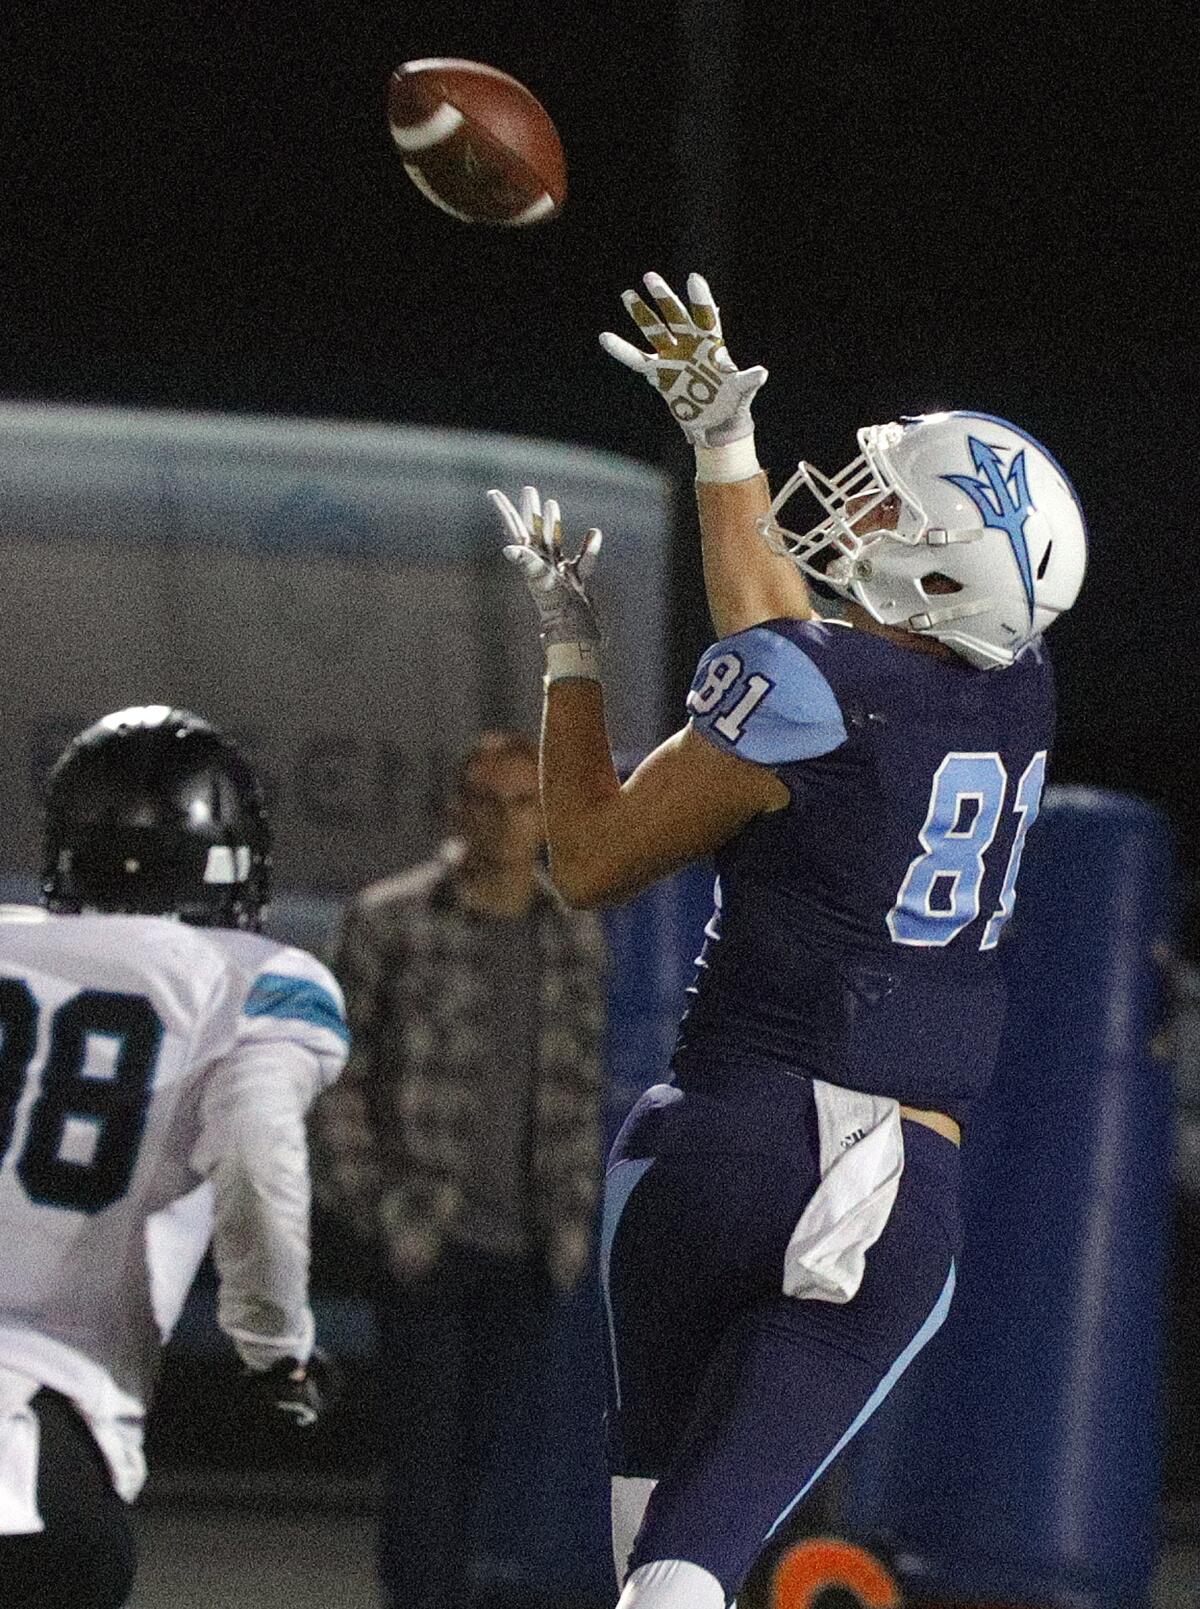 Corona del Mar's Mark Redman gets under a long pass against Santiago that leads to a touchdown in the first round of the CIF Southern Section Division 3 playoffs on Friday at Newport Harbor High.